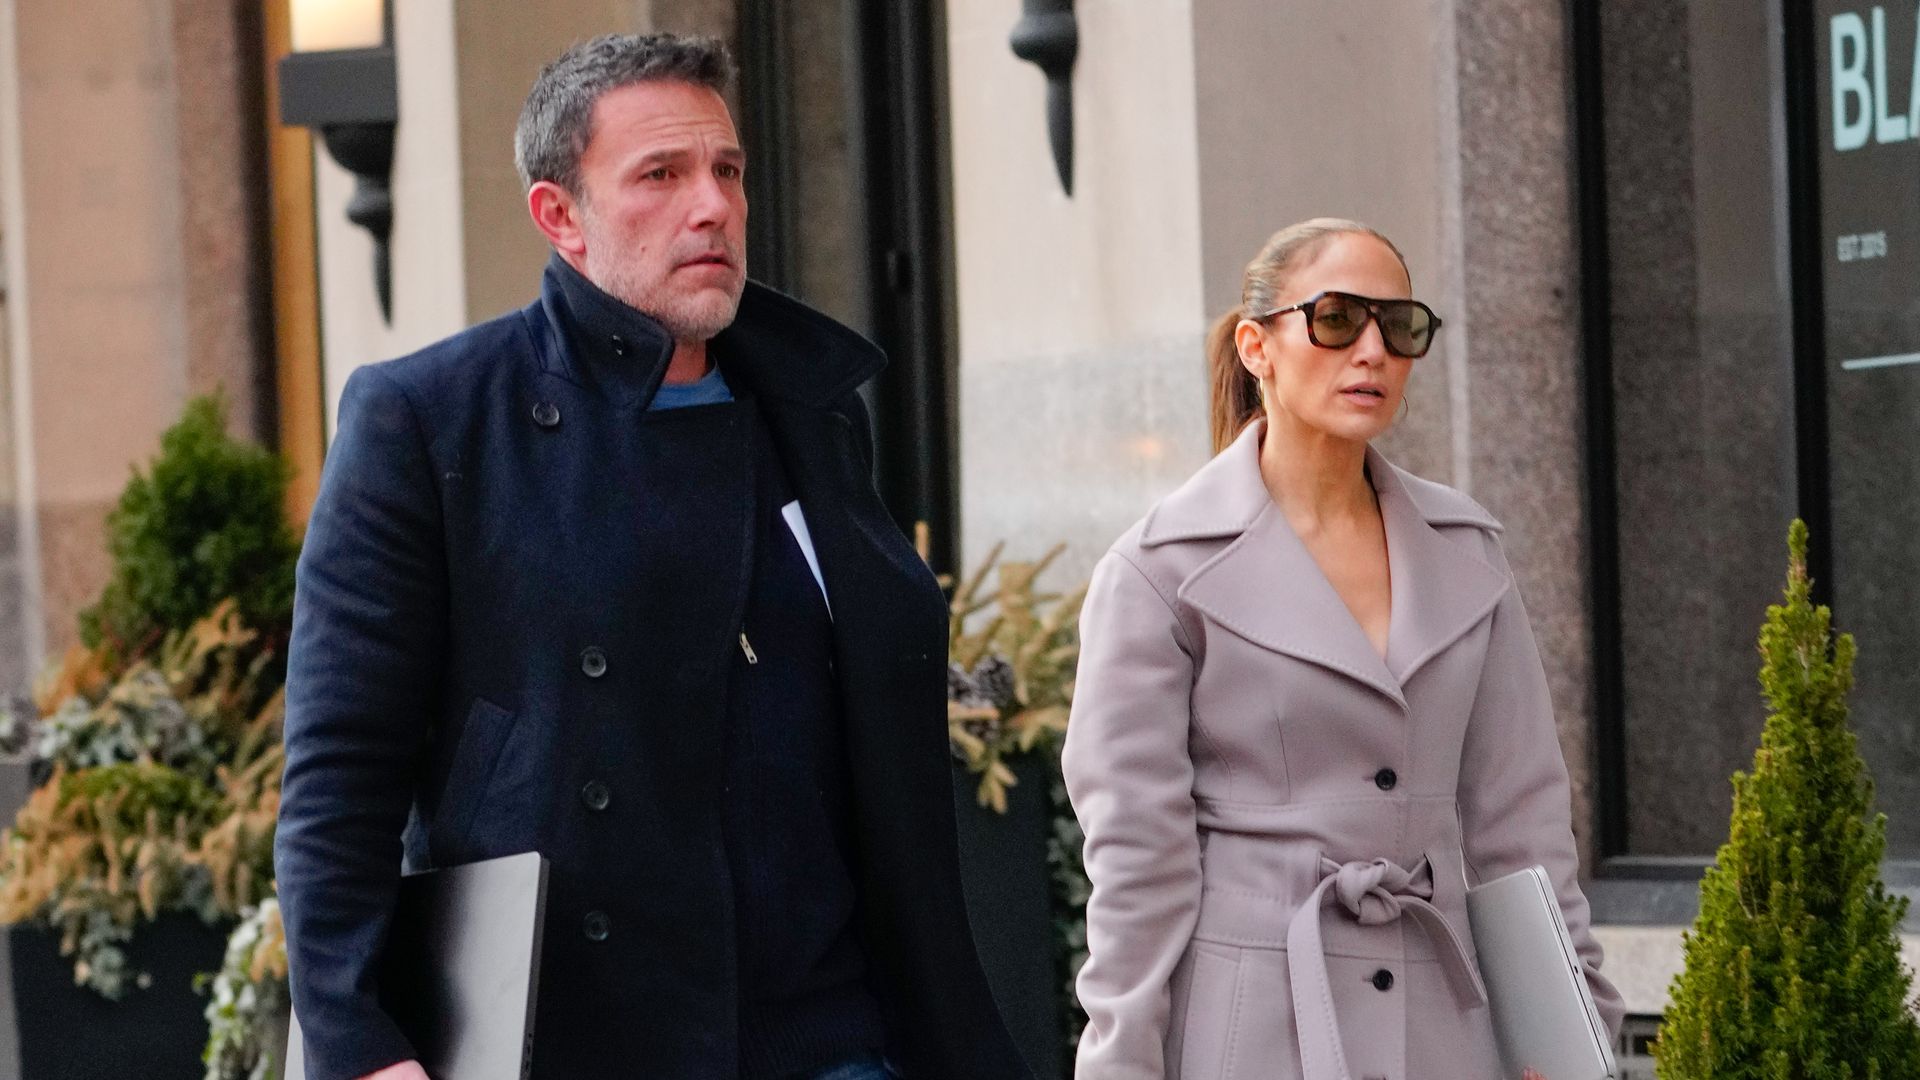 Ben Affleck and Jennifer Lopez reunite after singer's solo trip to Europe amid split reports